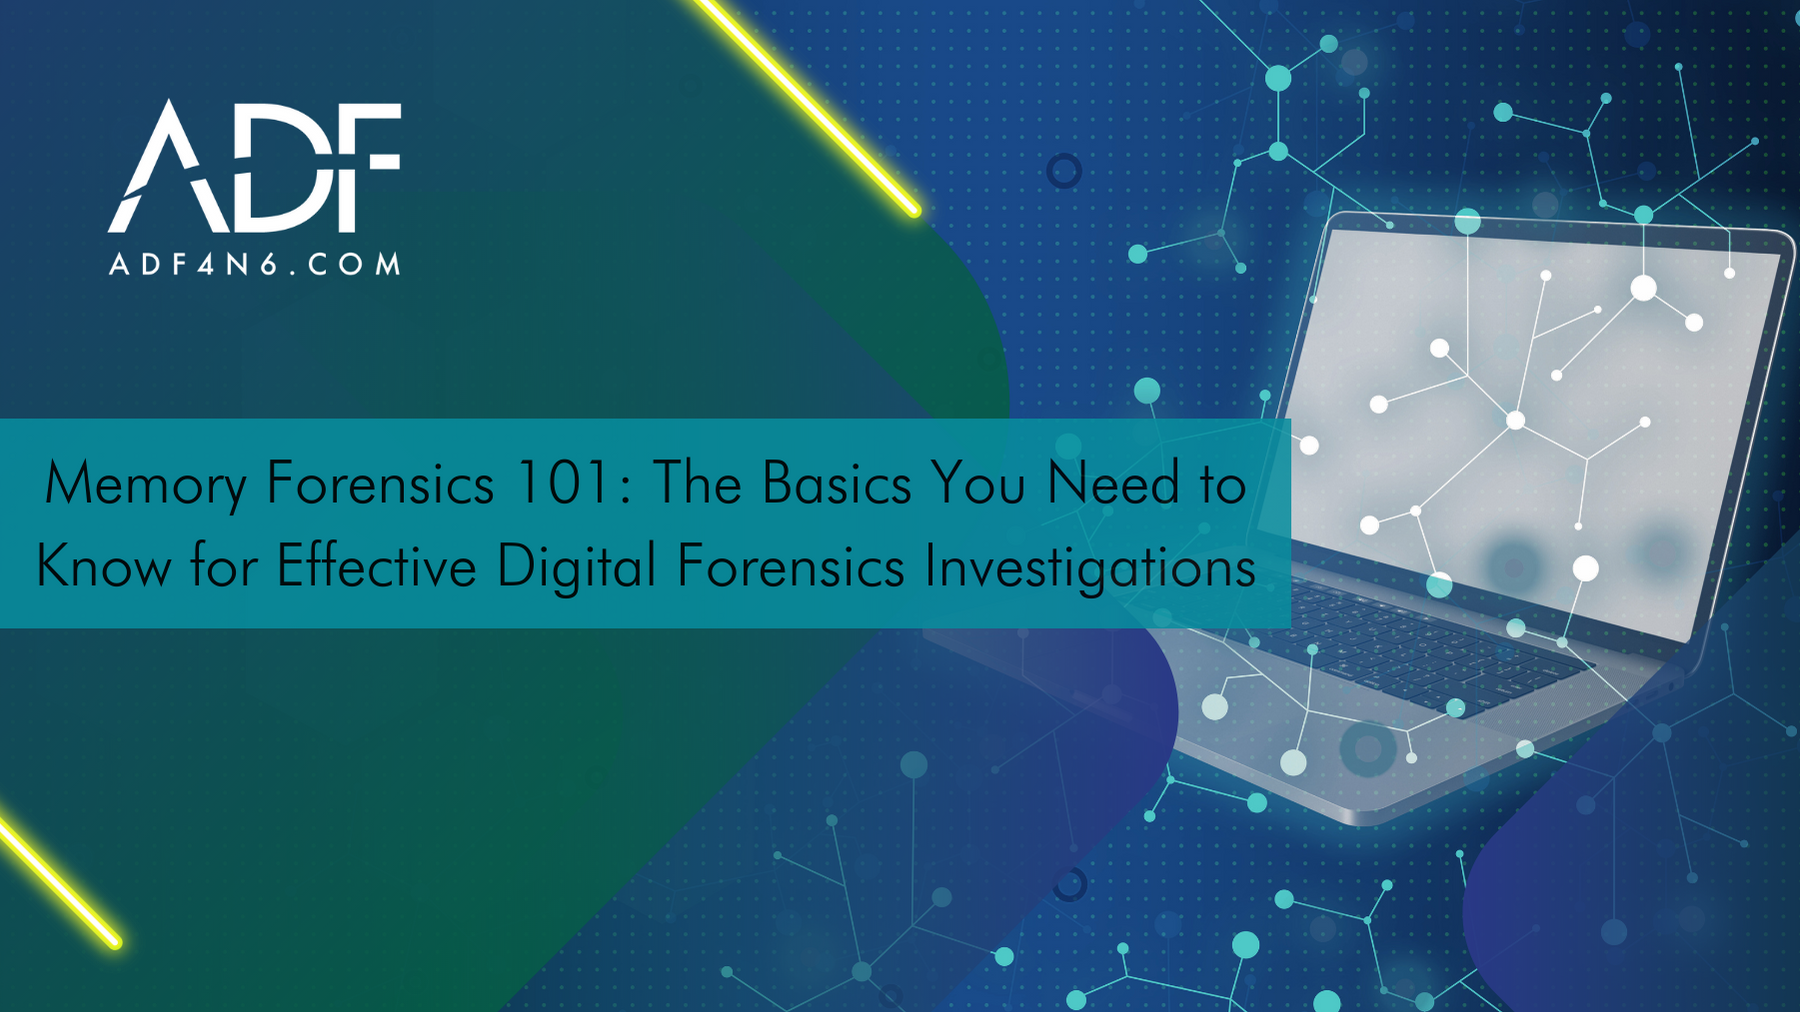 Memory Forensics 101: The Basics You Need to Know for Effective Digital Forensics Investigations